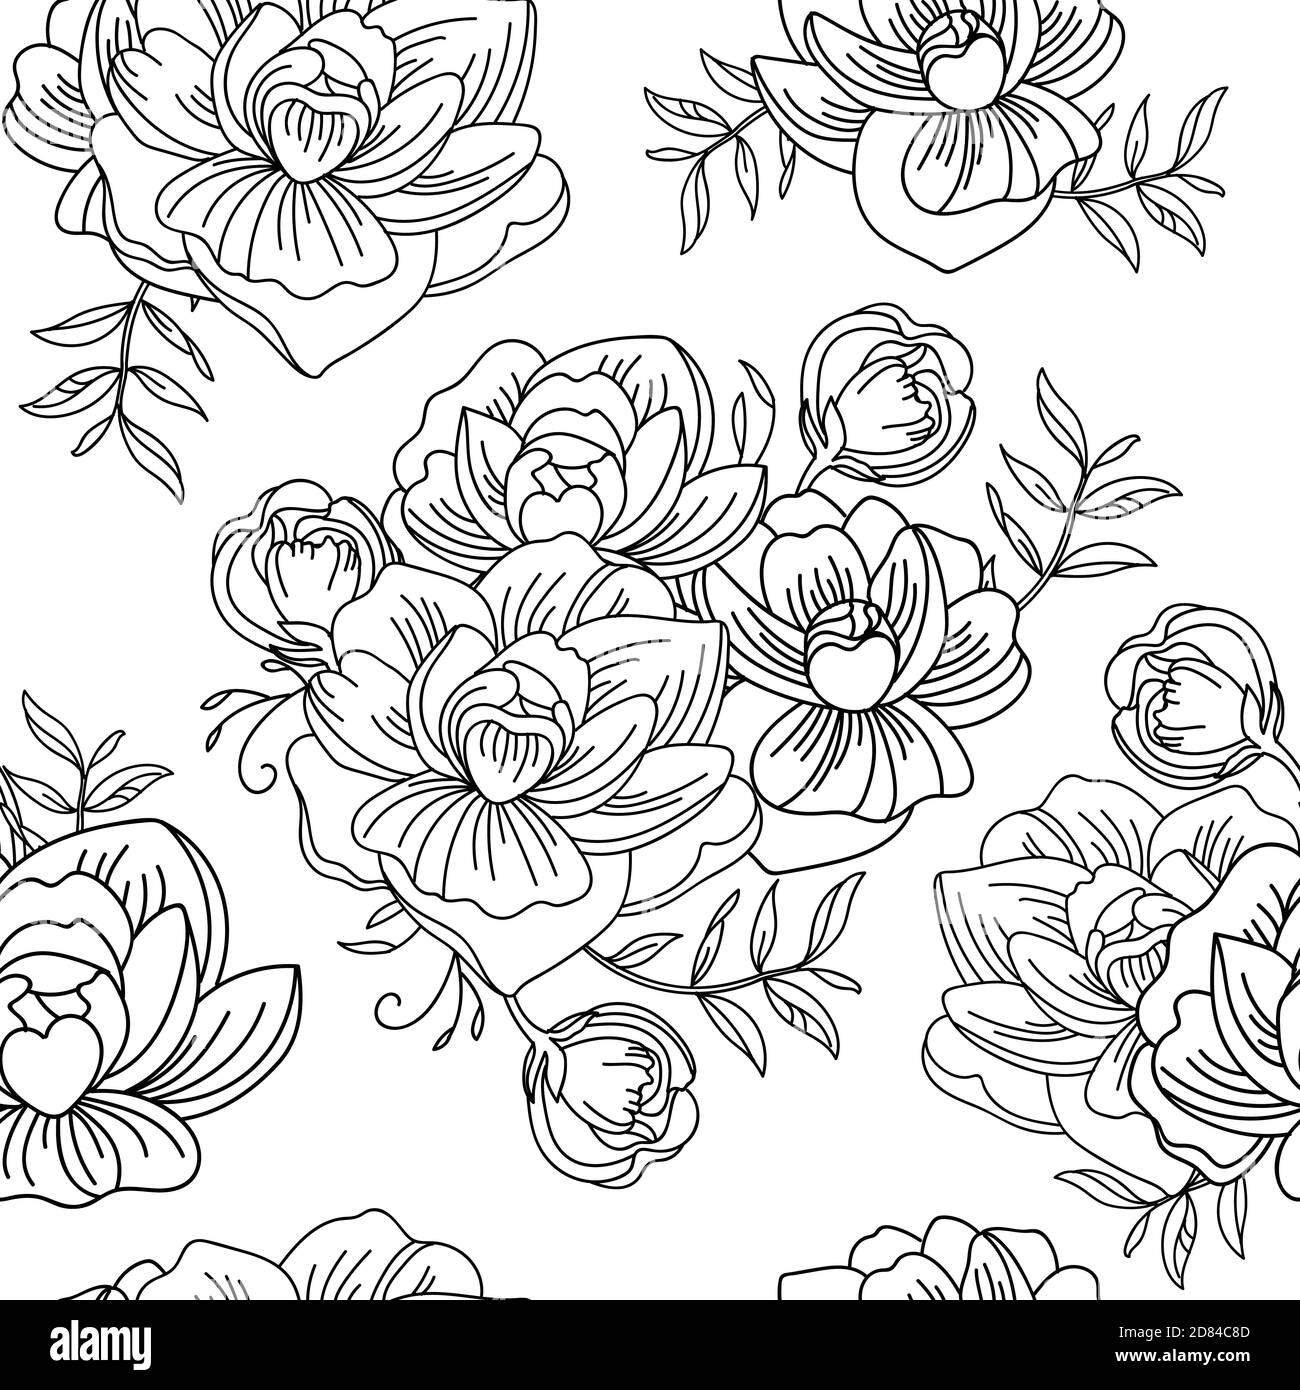 Seamless pattern with bouquet of peony flowers. Monochrome background for creating textiles, wallpaper, paper, wedding invitation, design, print. Vect Stock Vector